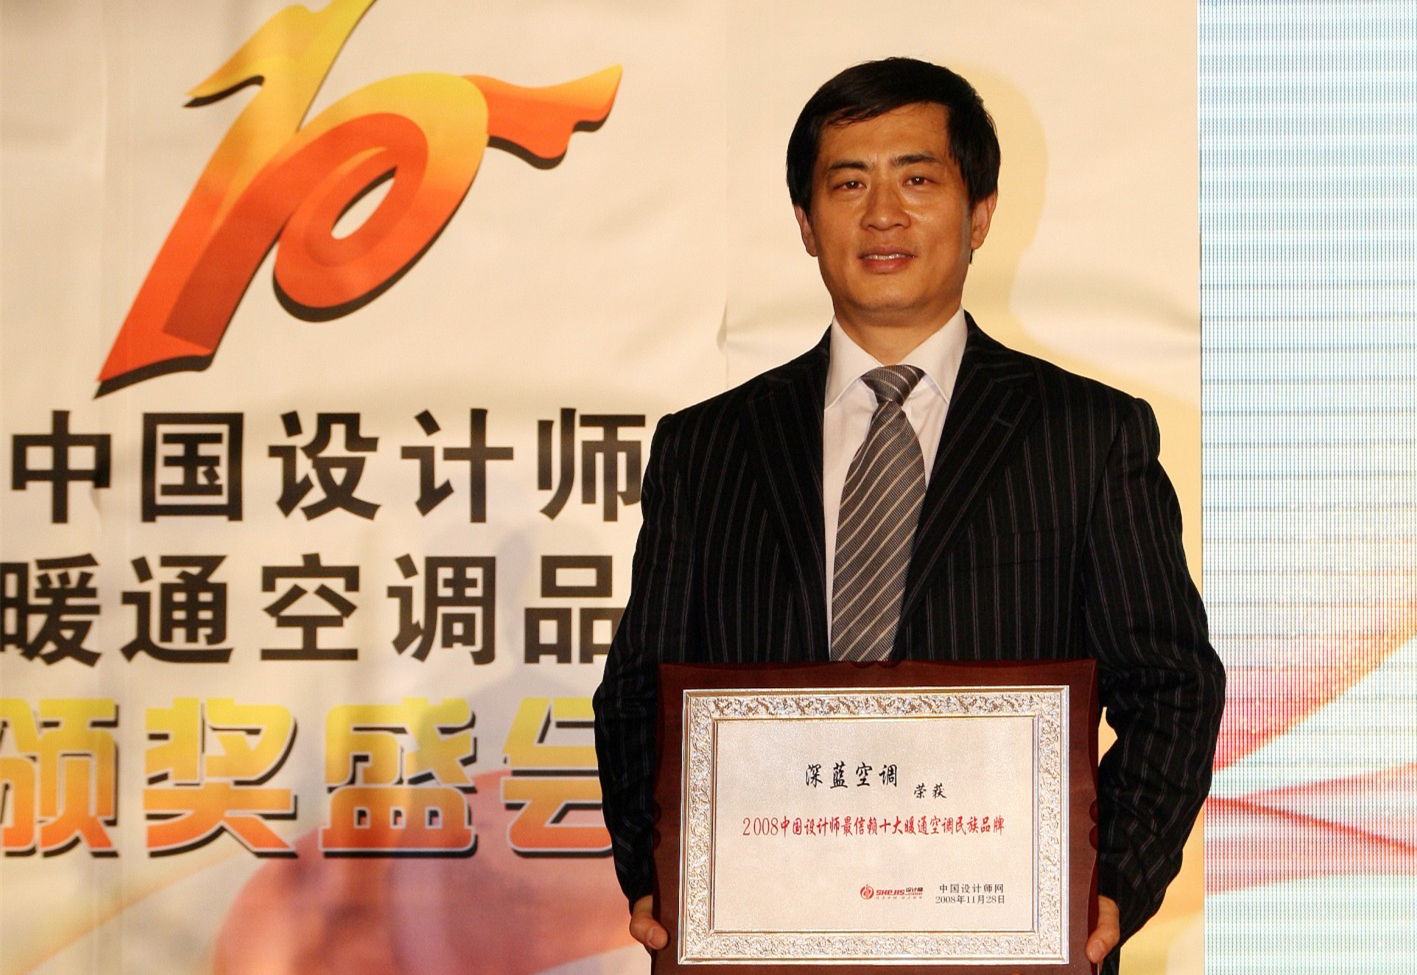 Accepting the prize for the 2008 China Top Ten Most Trusted National Brands